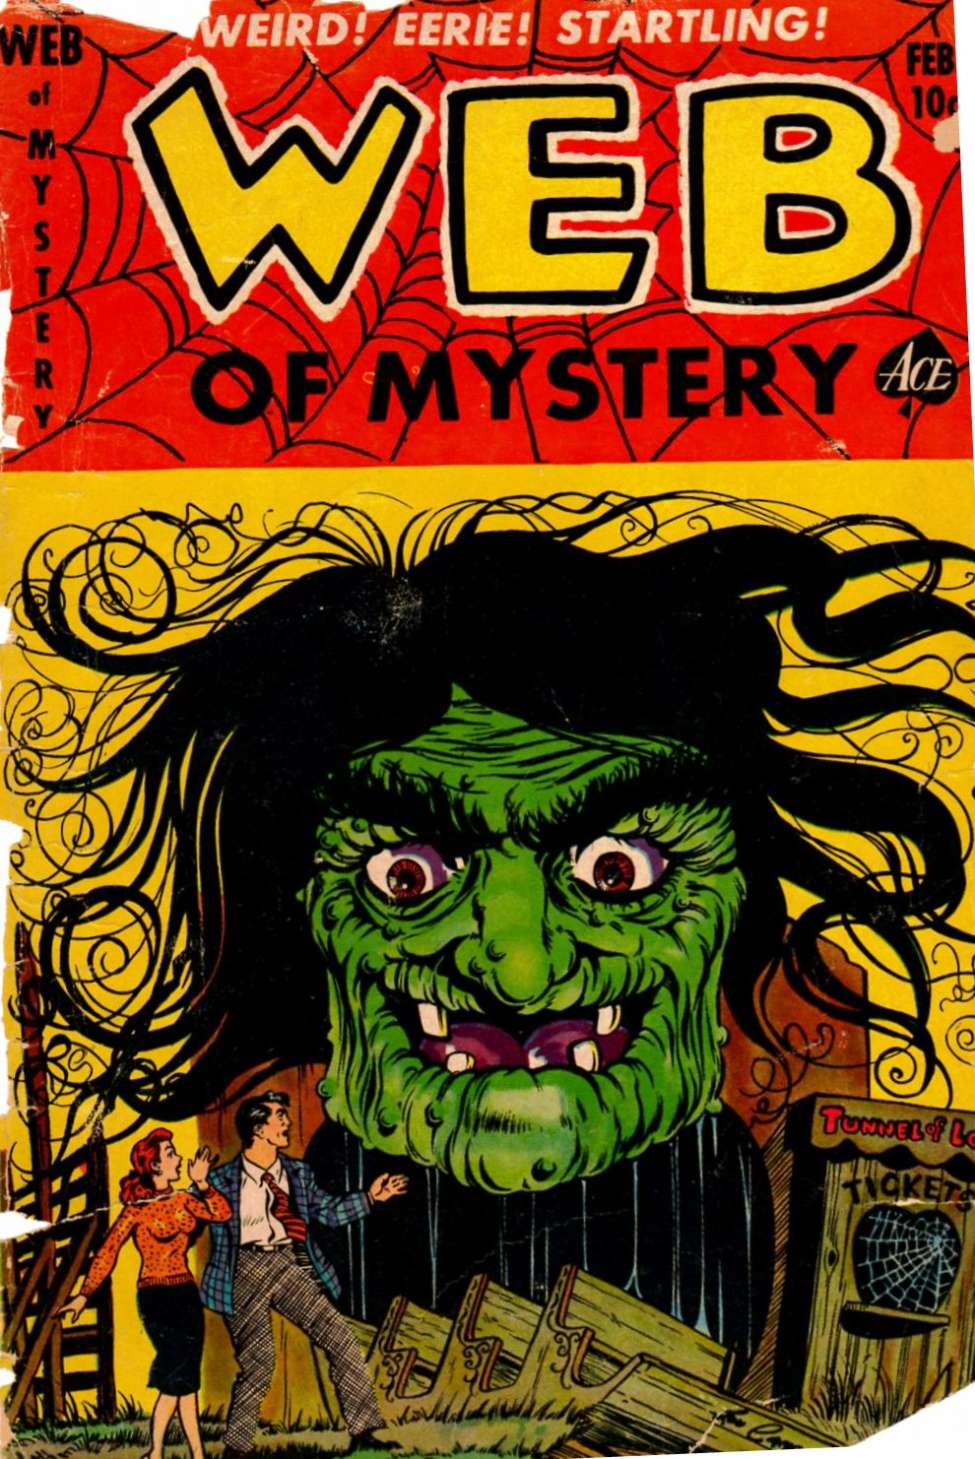 Comic Book Cover For Web of Mystery 17 - Version 1